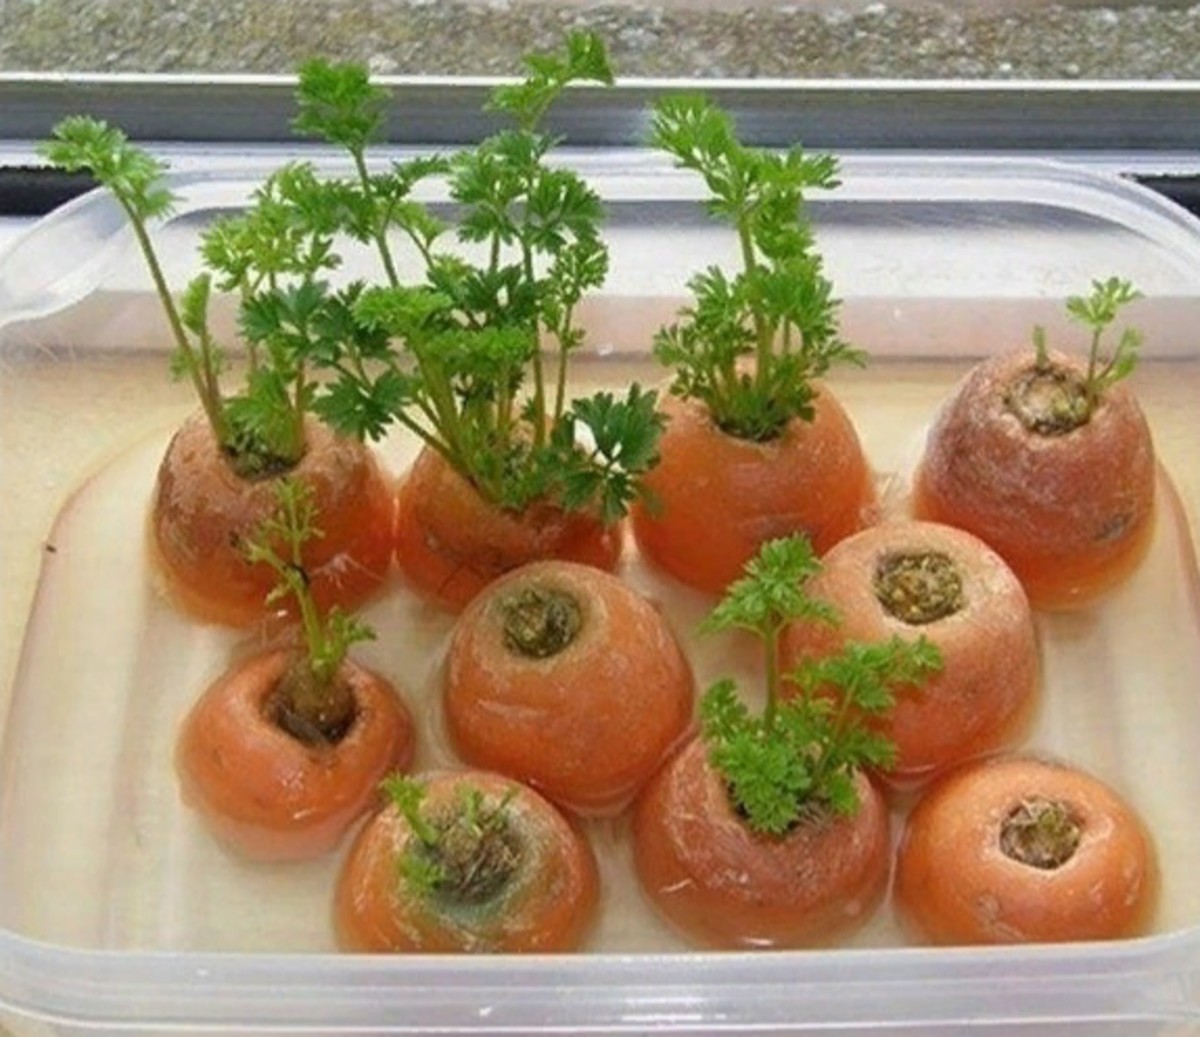 Place carrots bottom up in a container with a bit of water.